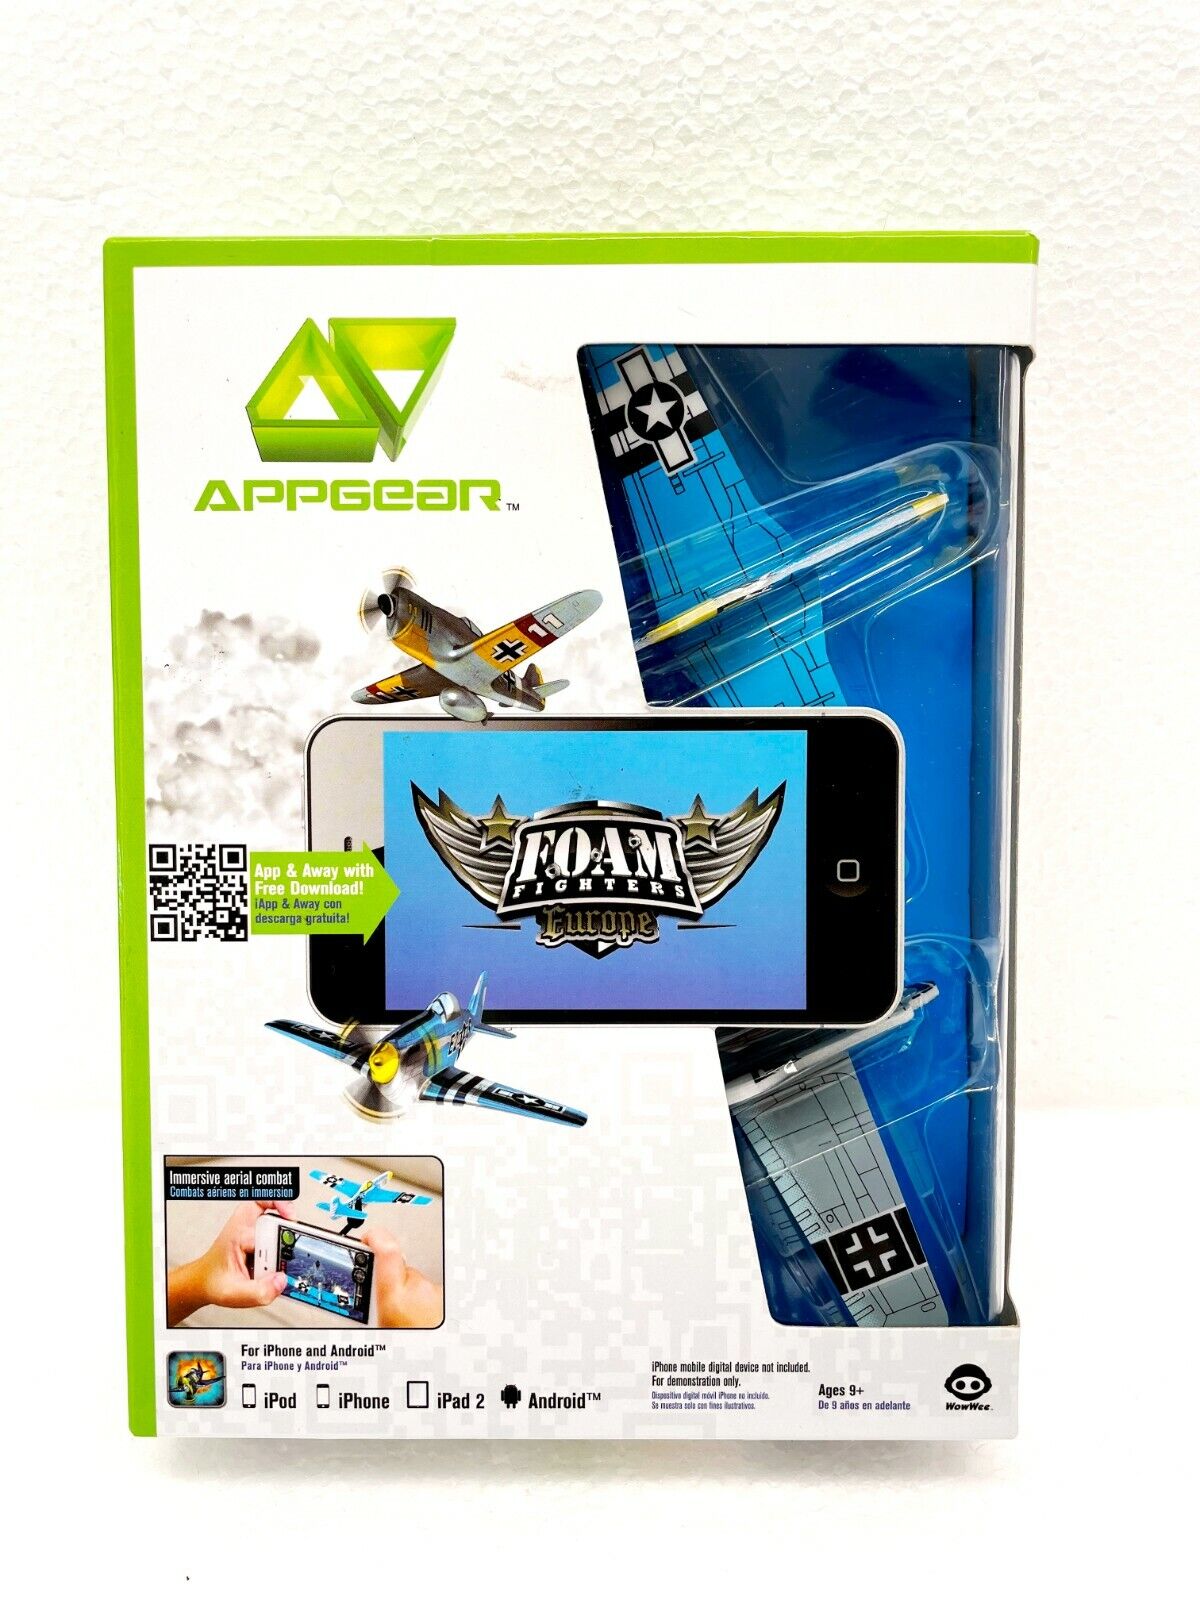 AppGear Foam WWII Fighters Europe Mobile App Game For iPhone iPod Android - NEW